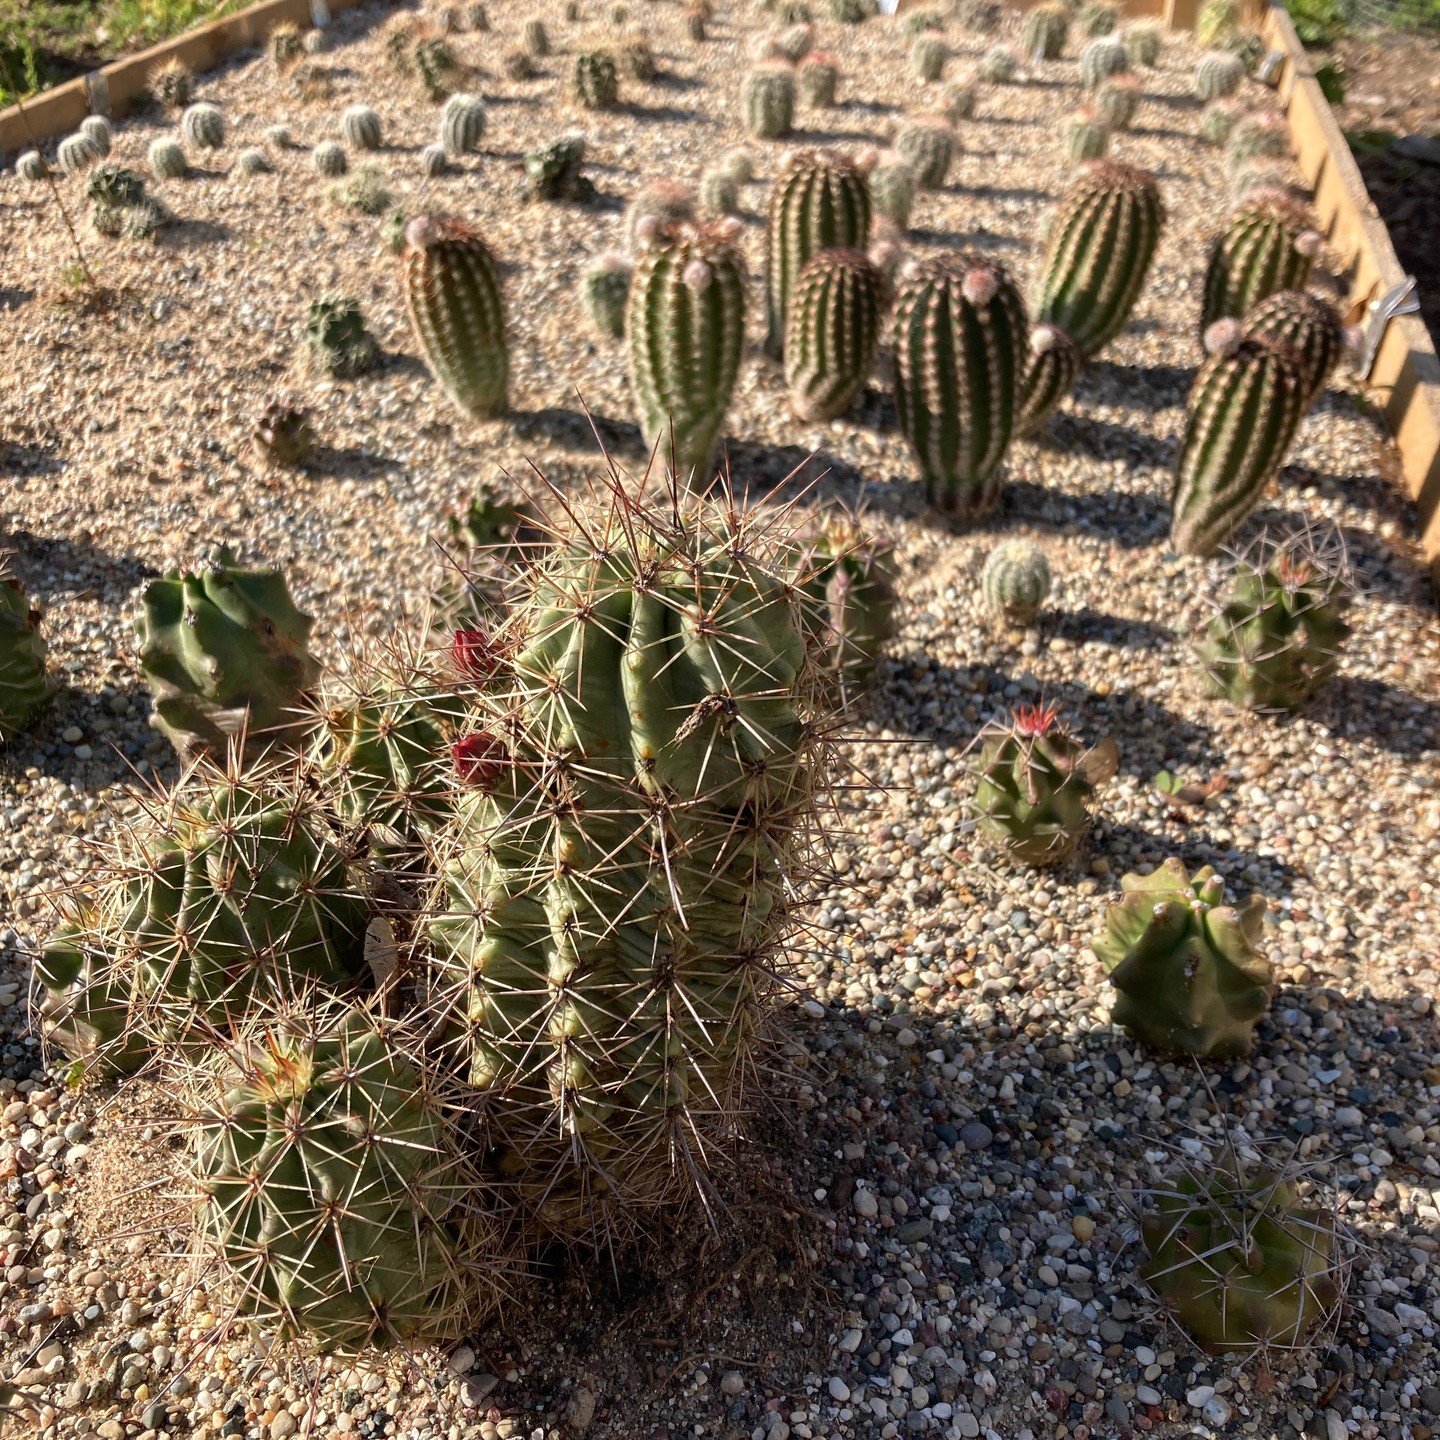 Cactus proving grounds... I've been growing lots from seed and seeing who can survive my winters. The big Echinocereus x roetteri is from @ethicaldesert , and has been through three winters here so far. I also have a bunch of Echinocereus triglochidi